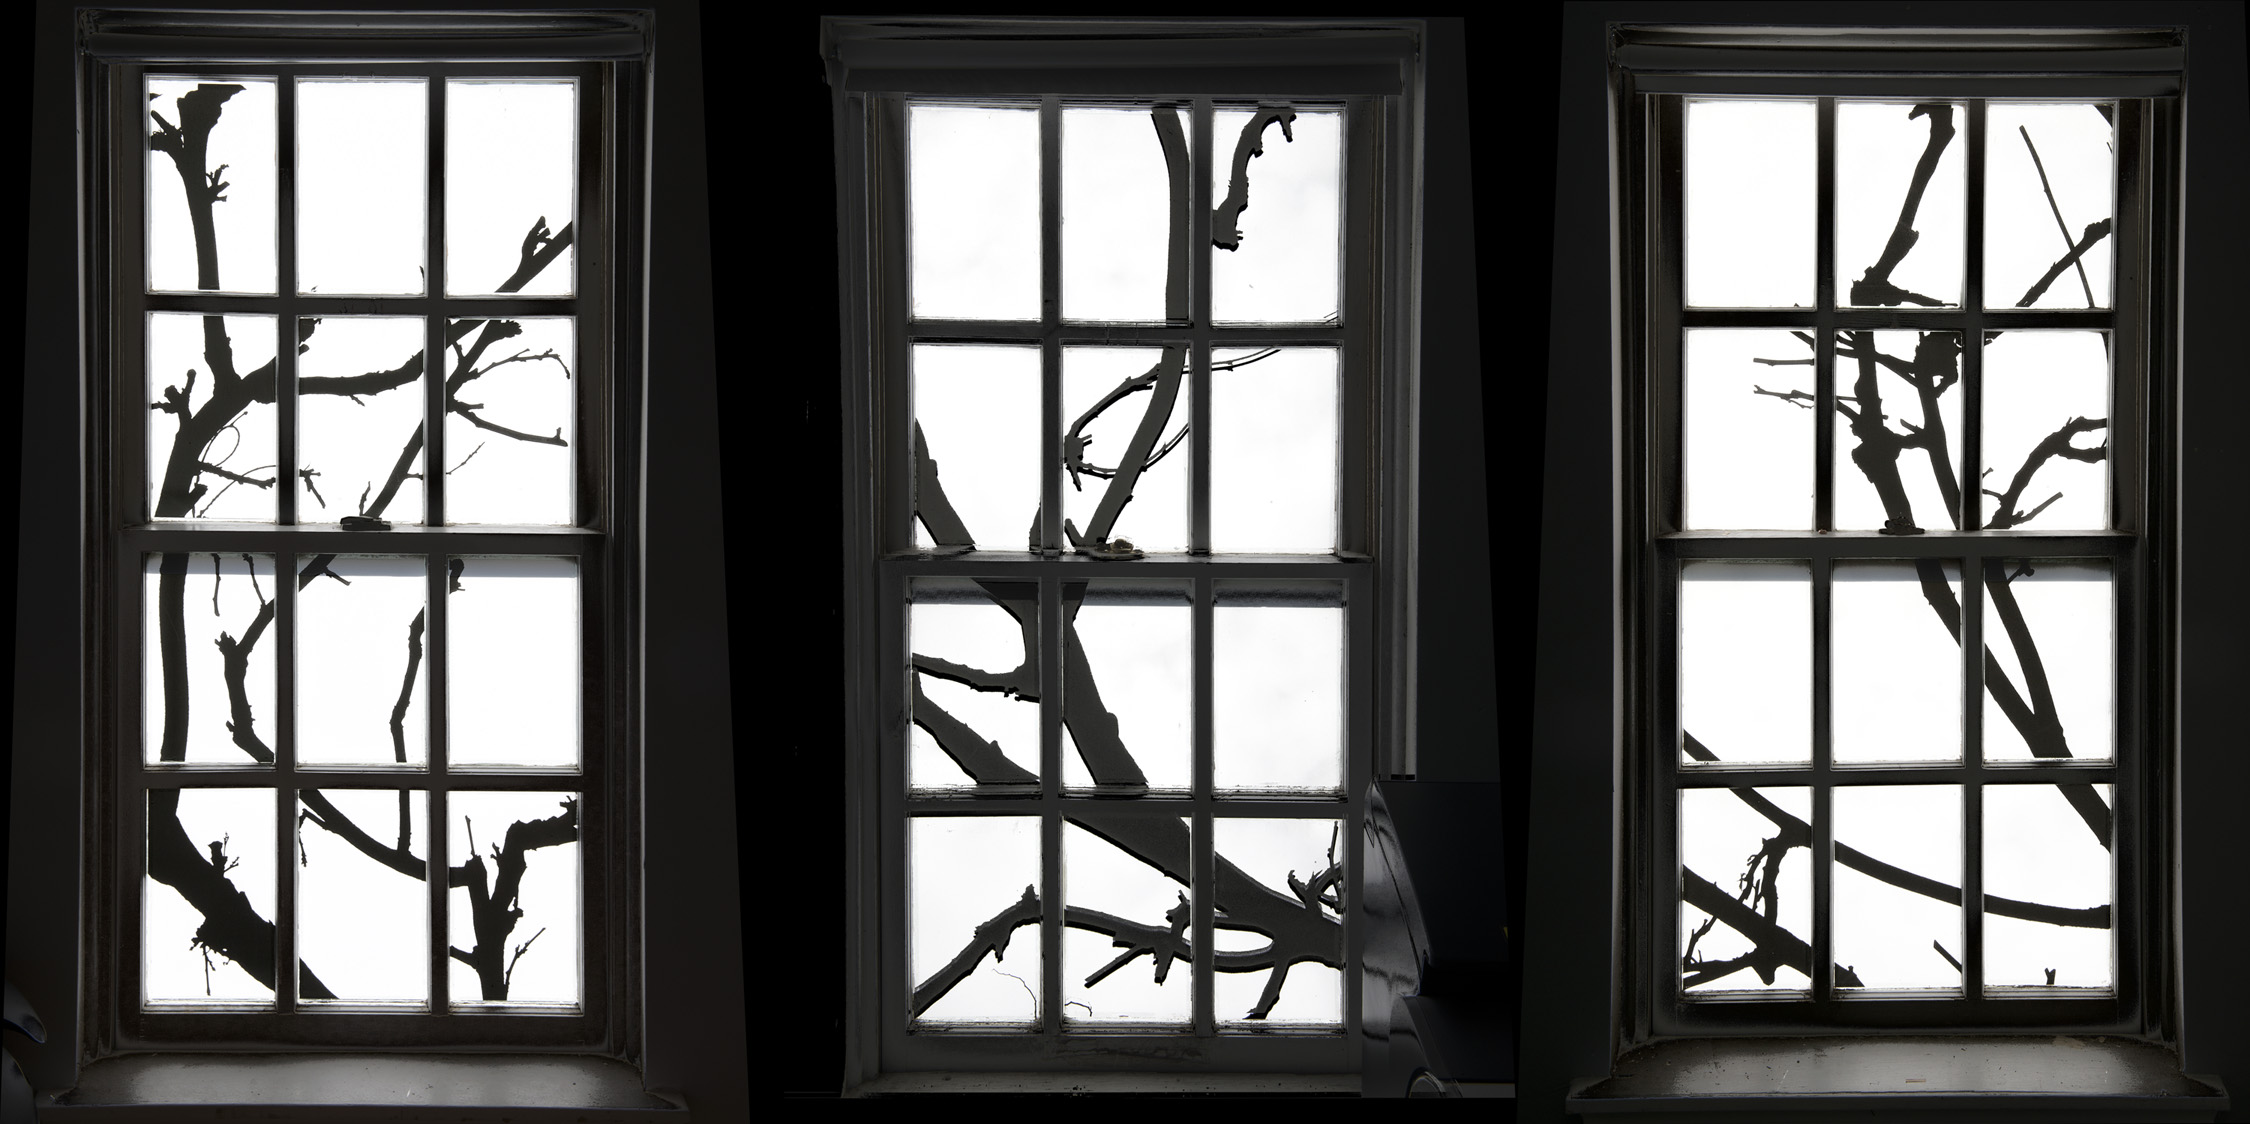 Three windows with transparent film prints of John Brown's photographs of tree branches